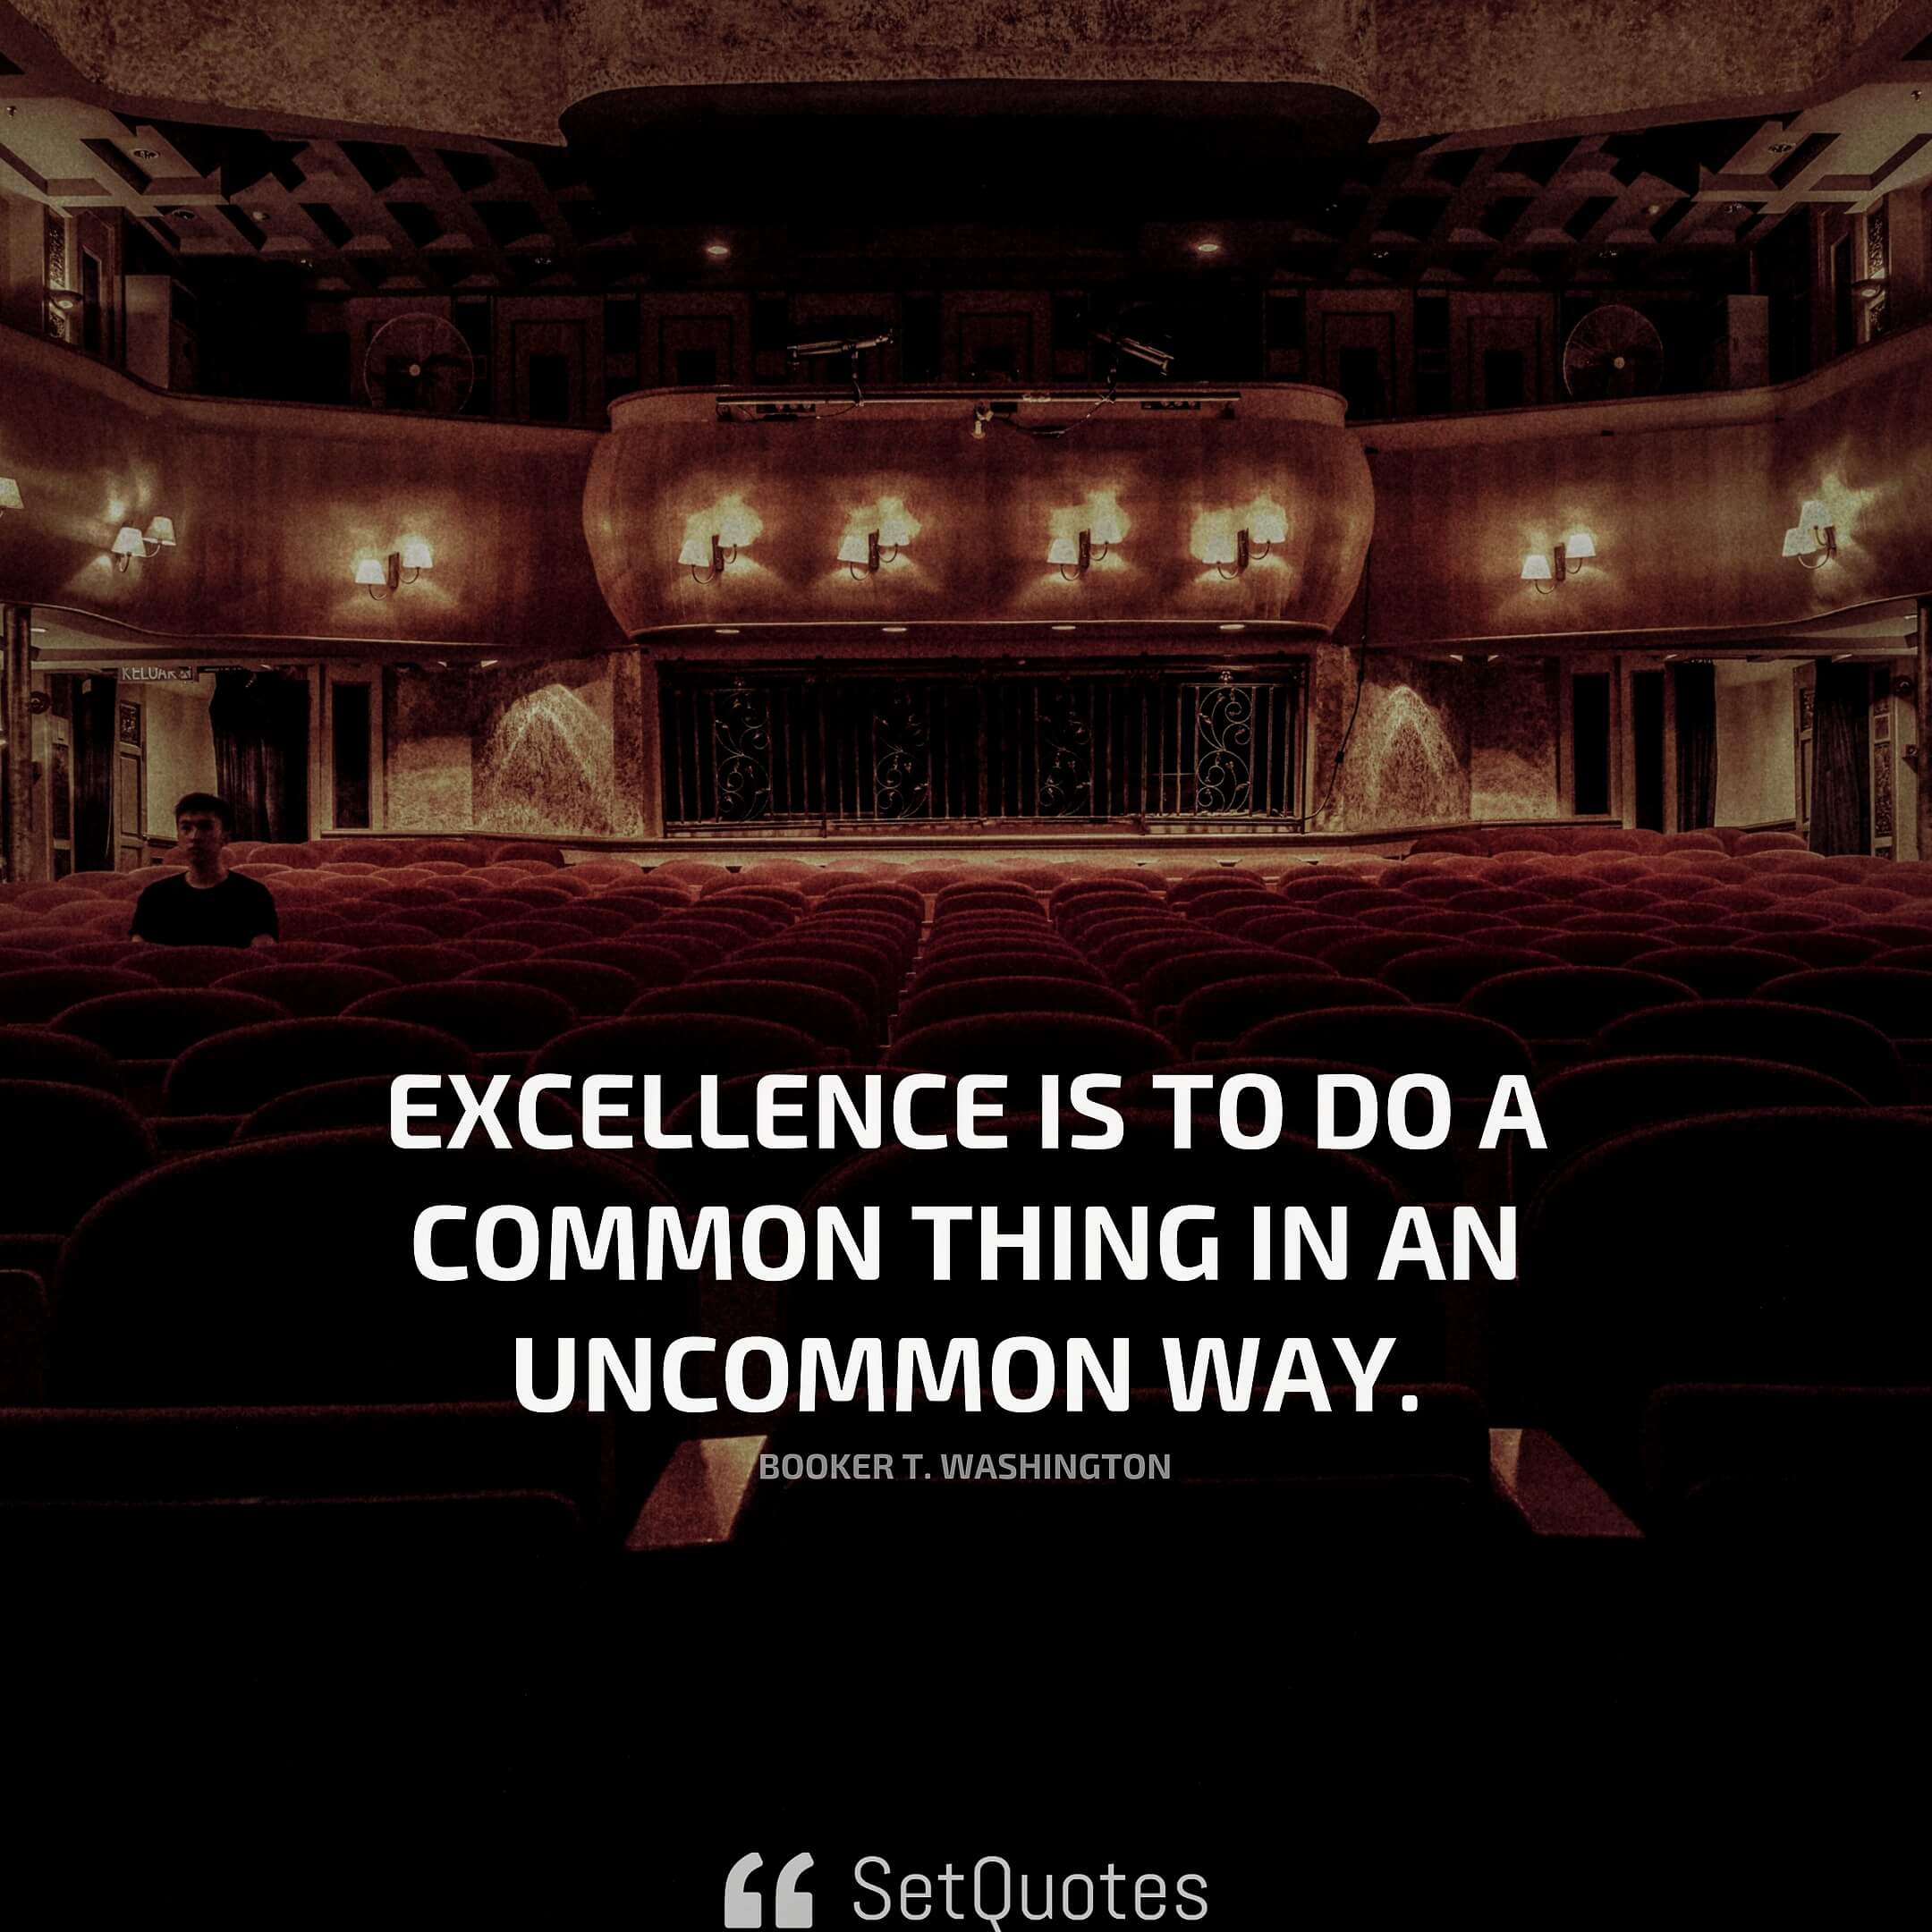 Excellence is to do a common thing in an uncommon way. – Booker T. Washington